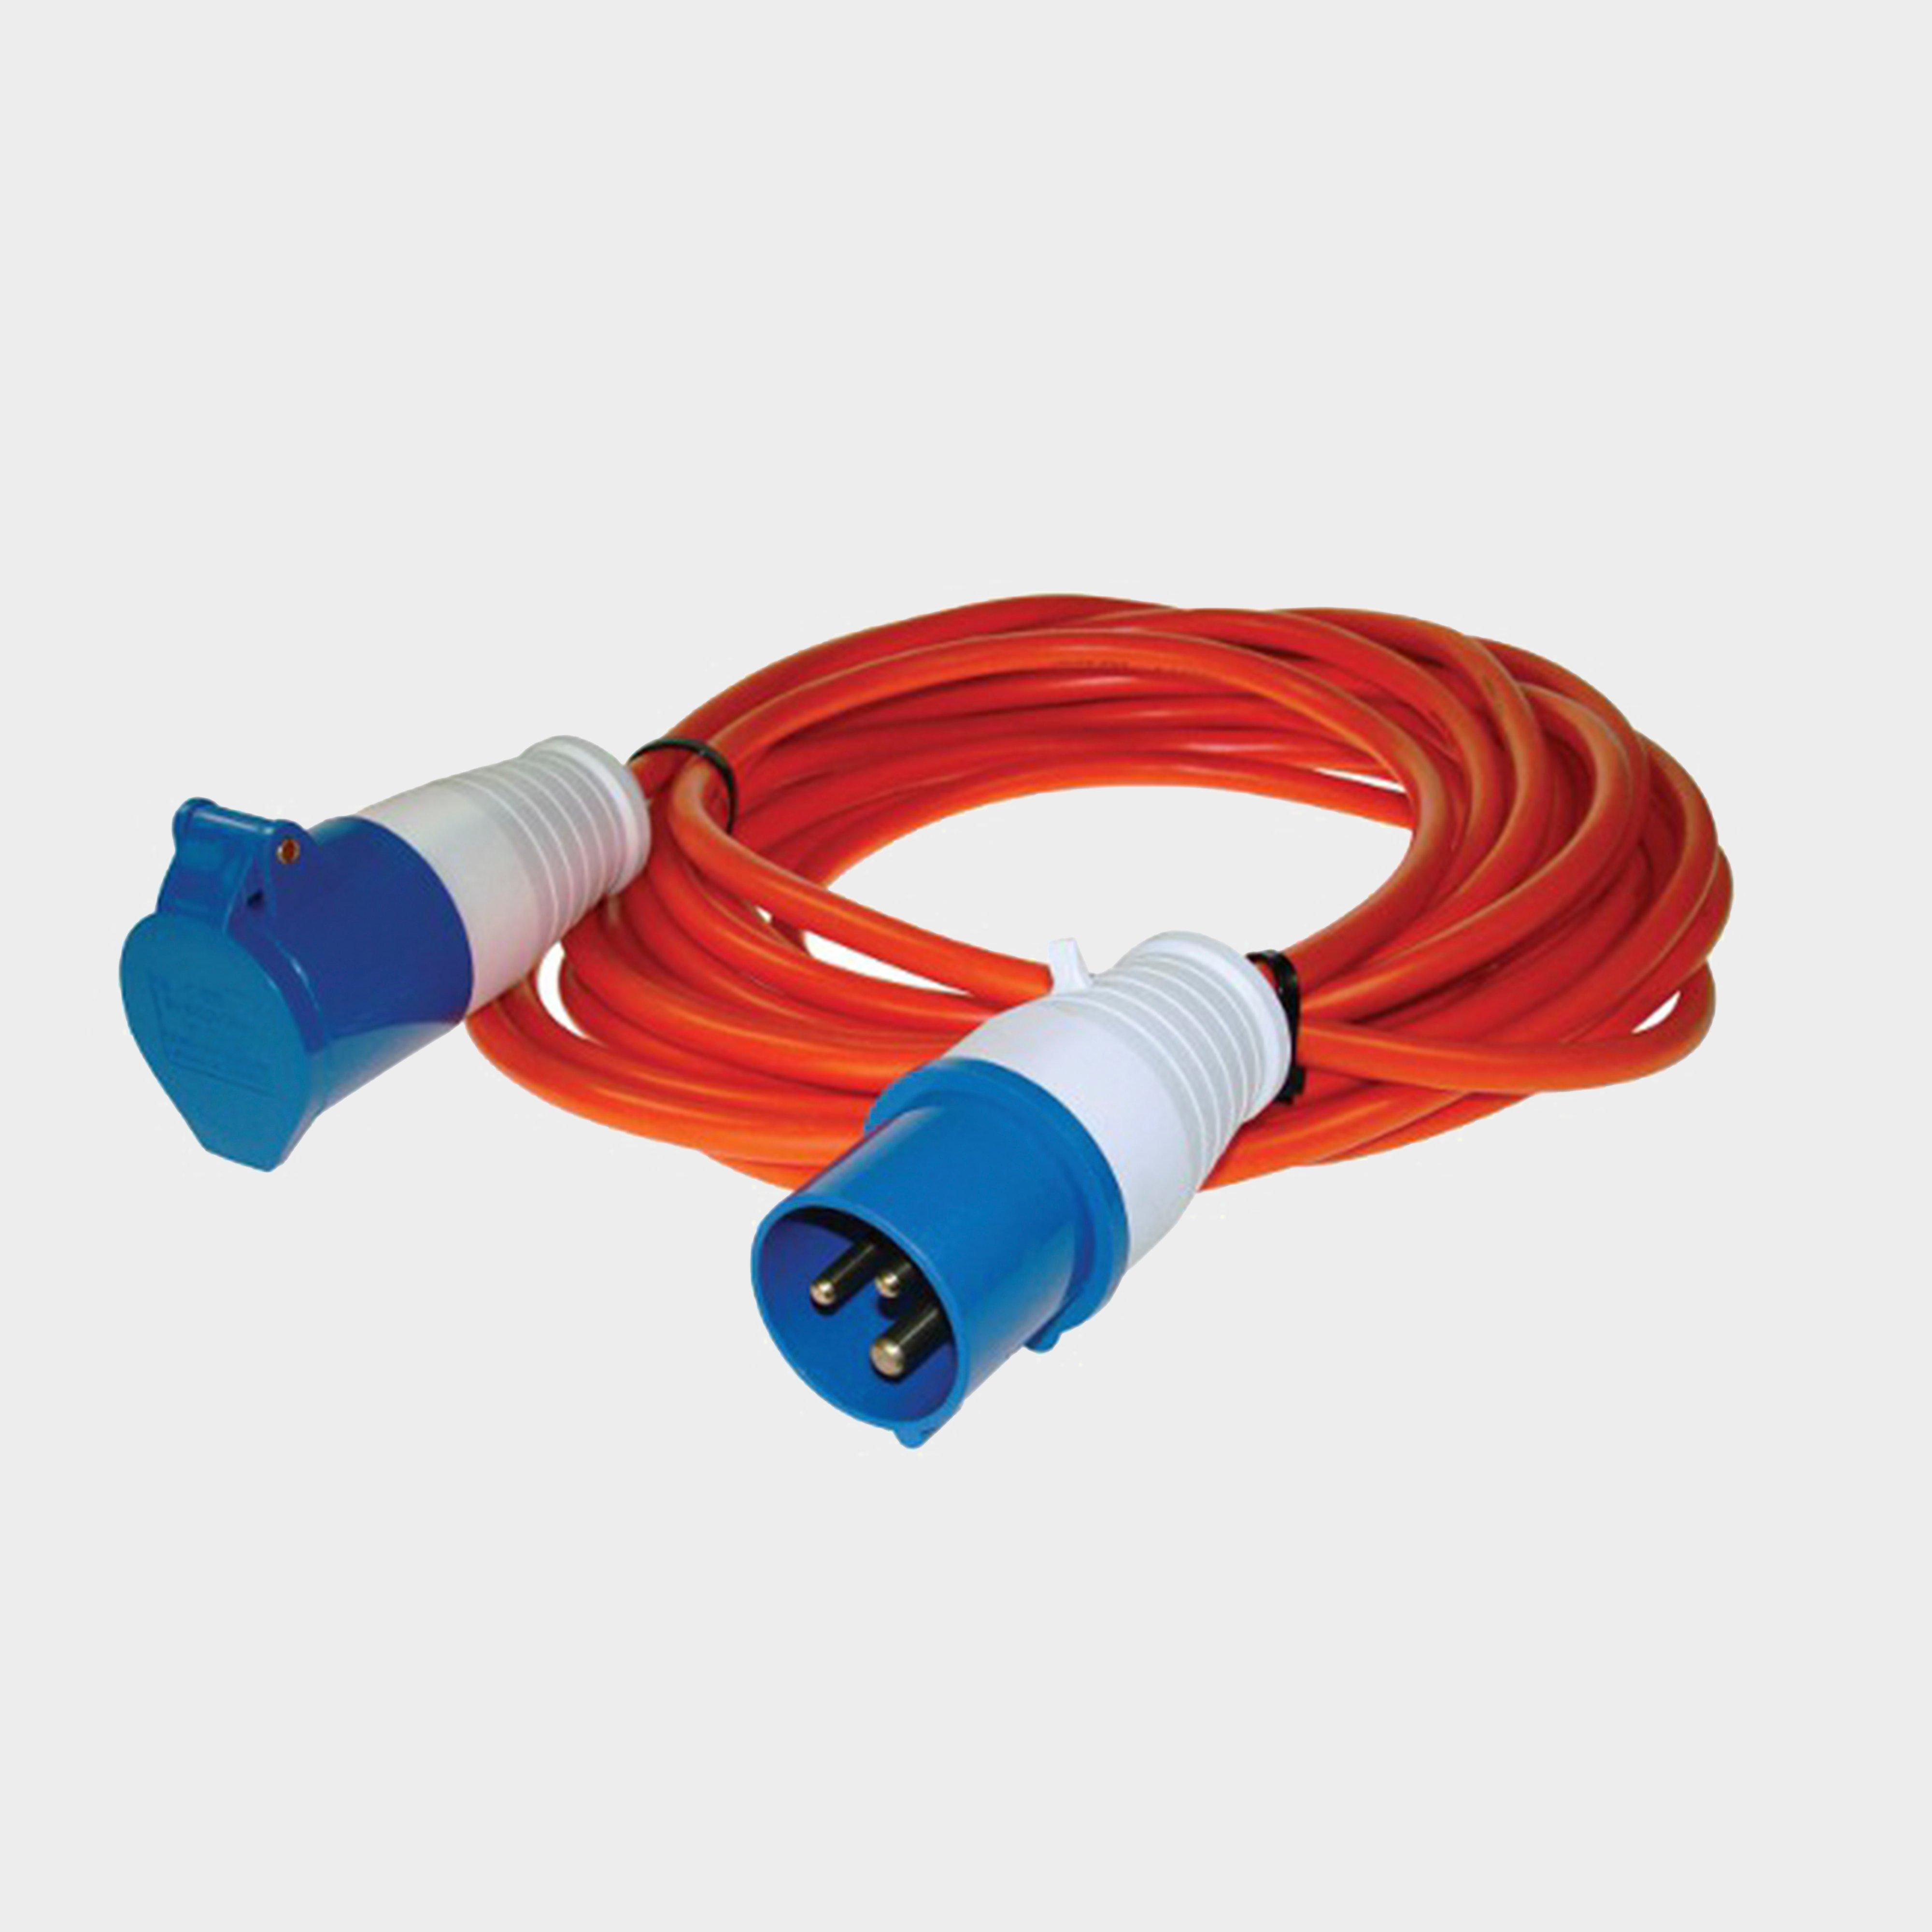 Eurohike 25M Extension Lead - Org, ORG